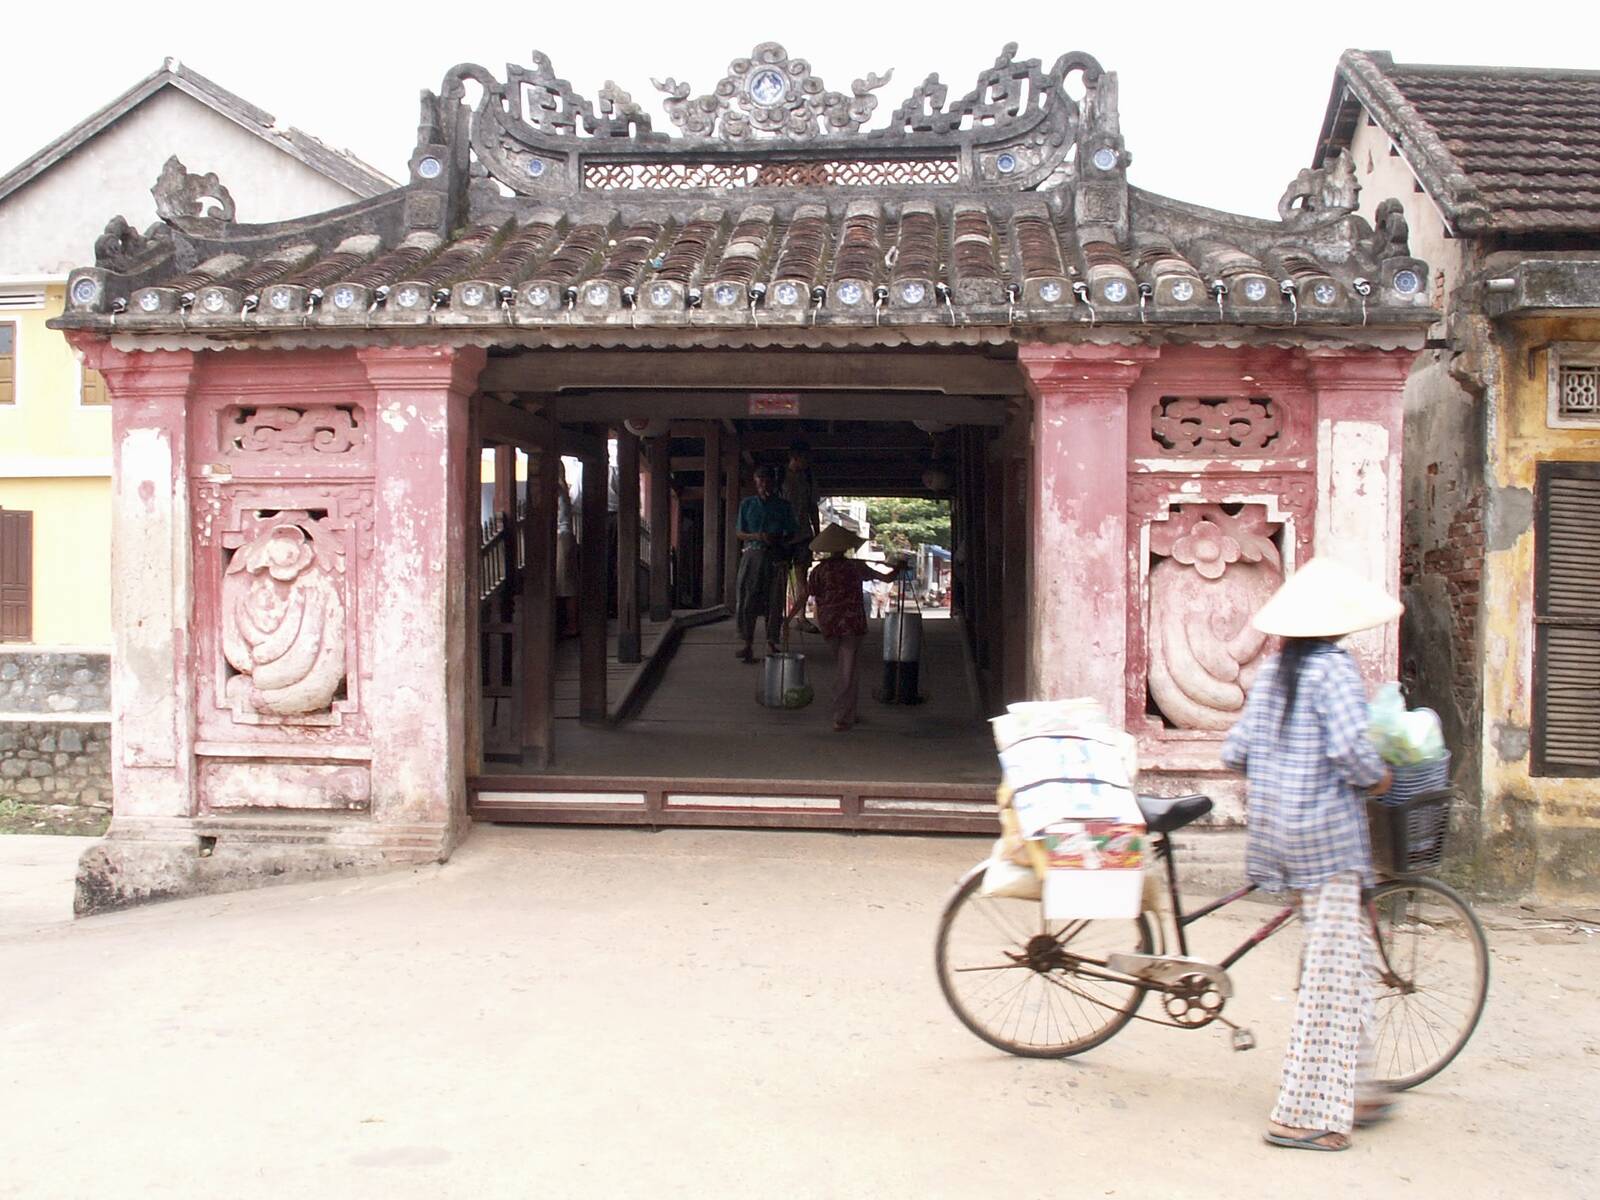 Image of Japanese Bridge in Hoi An by Nigel Shaw